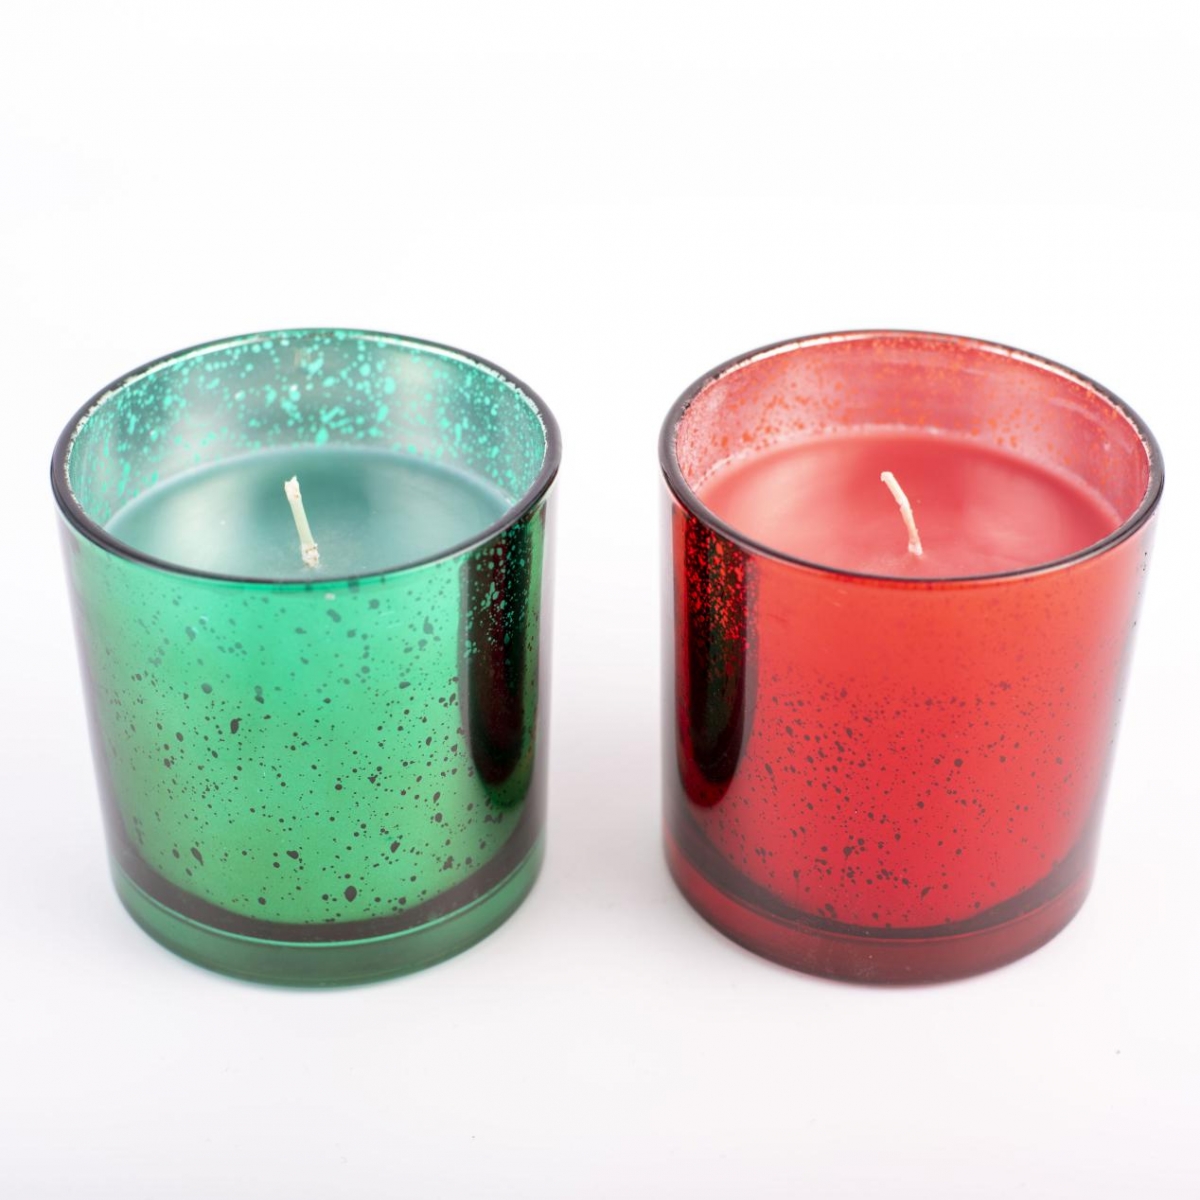 Christmas Candles -Green Dot ,Silver Candle Jar ,Soy Candles ,Essential Oil Candles ,China Factory ,Price-HOWCANDLE-Candles,Scented Candles,Aromatherapy Candles,Soy Candles,Vegan Candles,Jar Candles,Pillar Candles,Candle Gift Sets,Essential Oils,Reed Diffuser,Candle Holder,